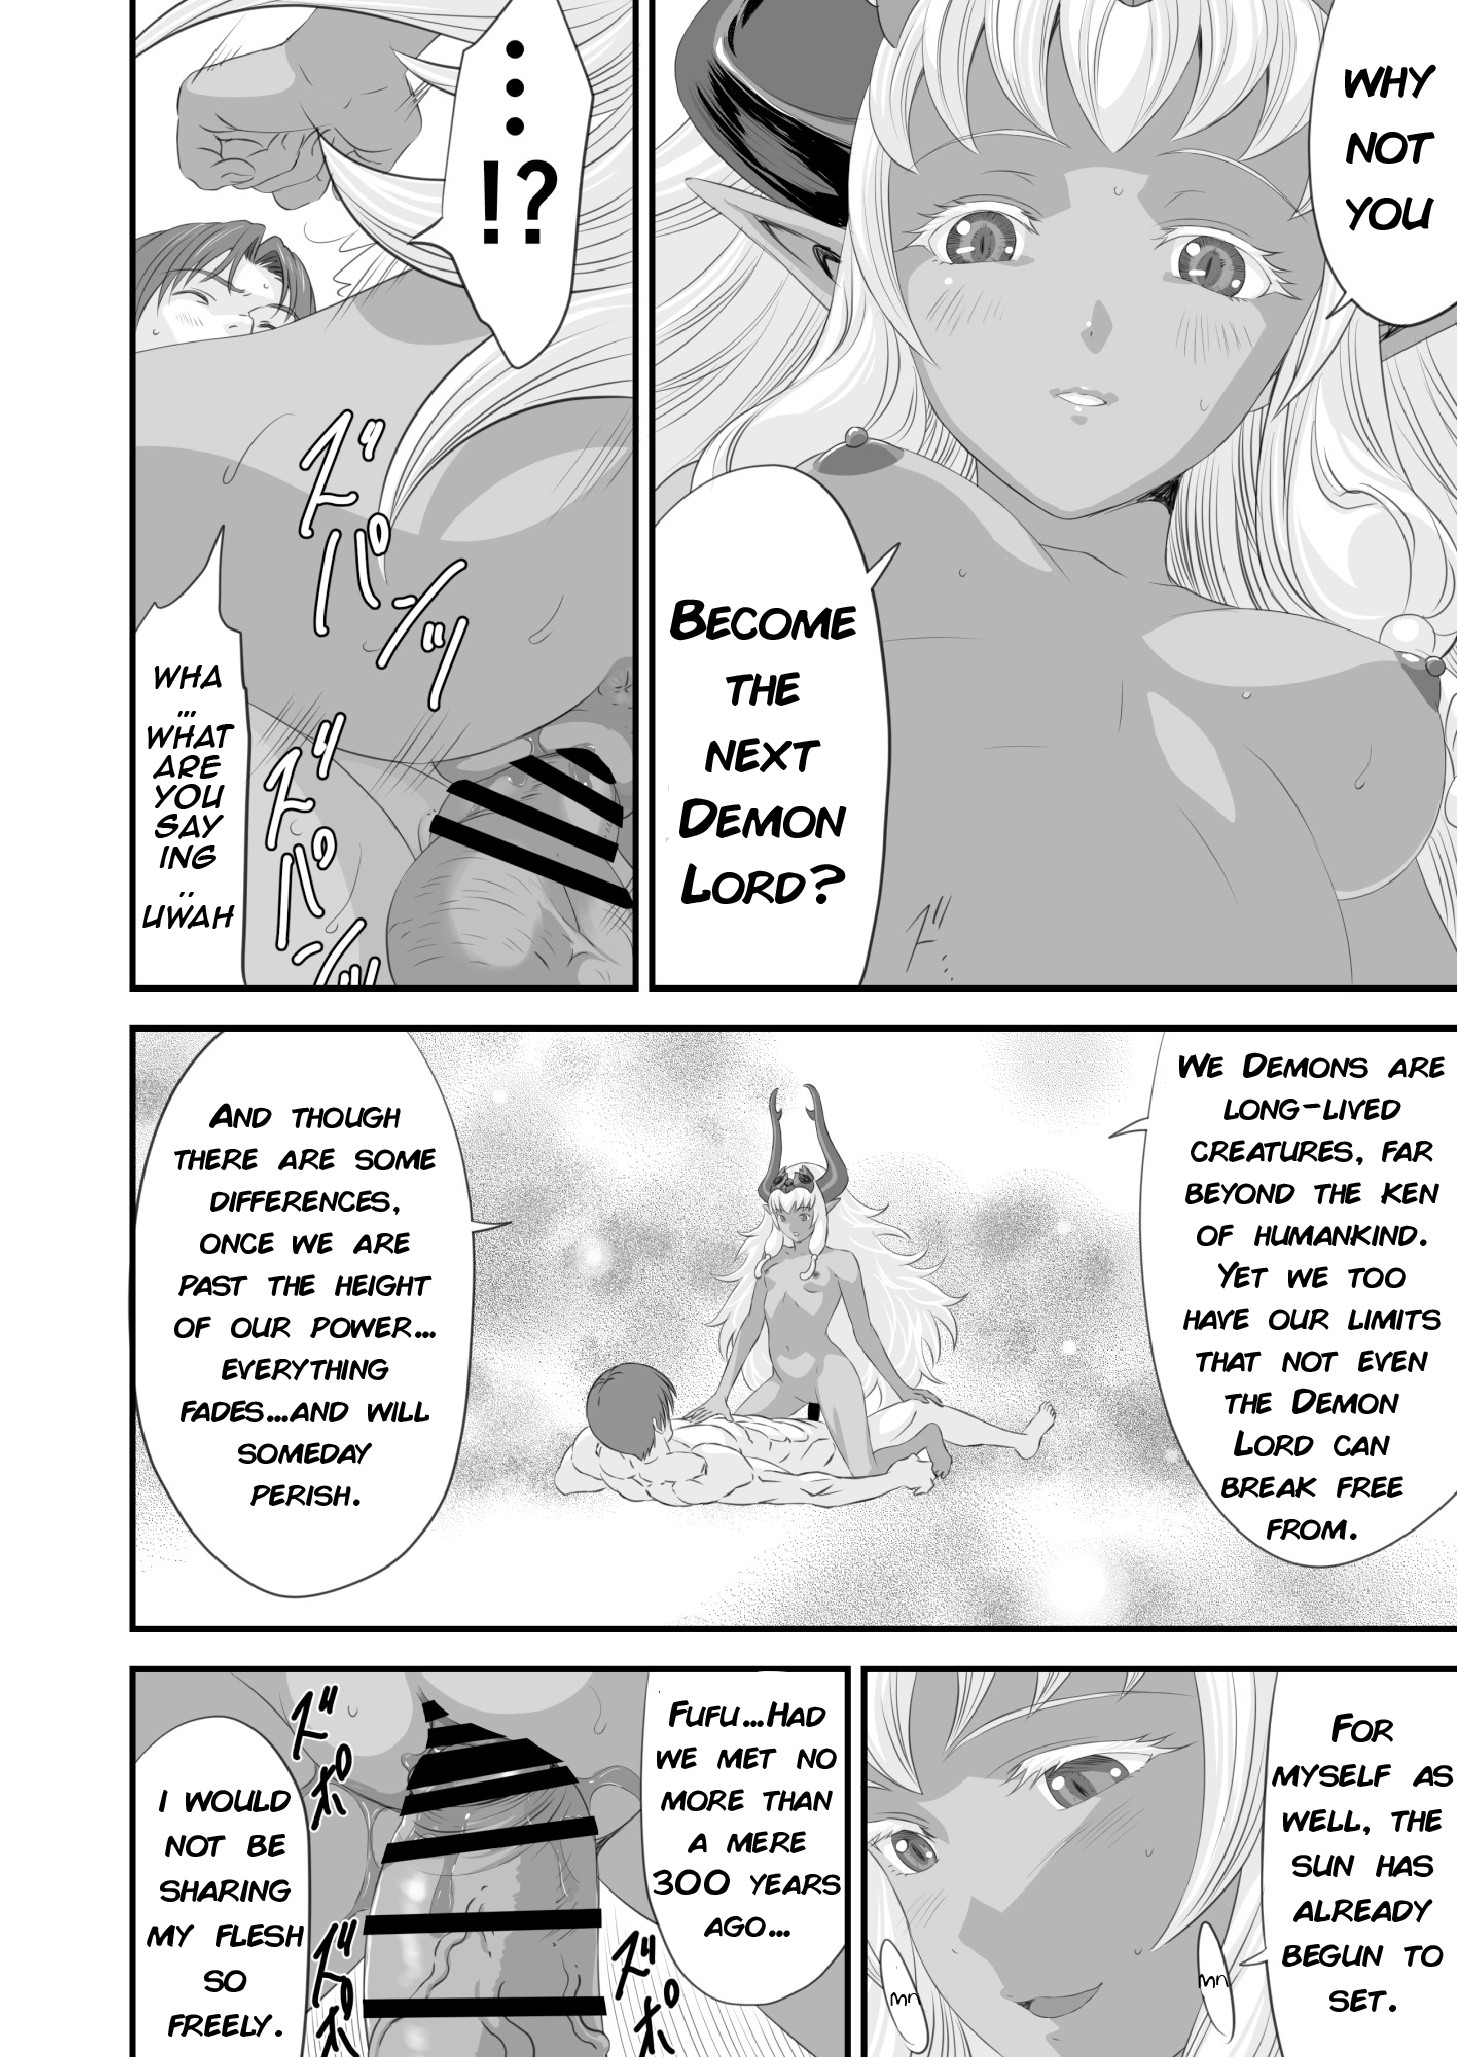 Page 55 | The End of the Line for the Cuckold Hero - Original Hentai  Doujinshi by Yuugen Sougen - Pururin, Free Online Hentai Manga and  Doujinshi Reader